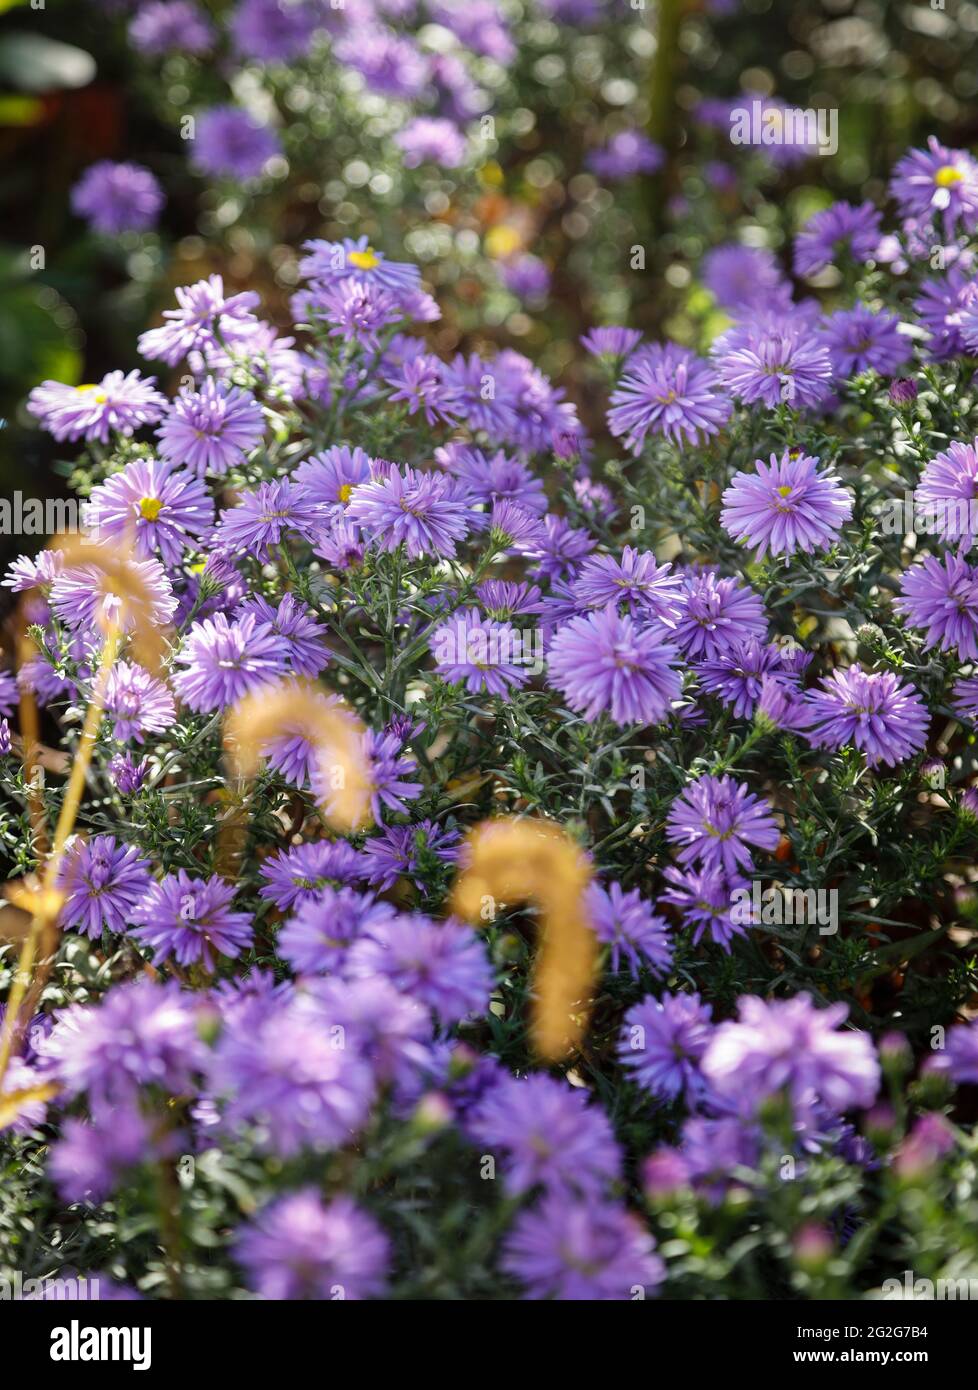 Purple flowers of the asters Stock Photo